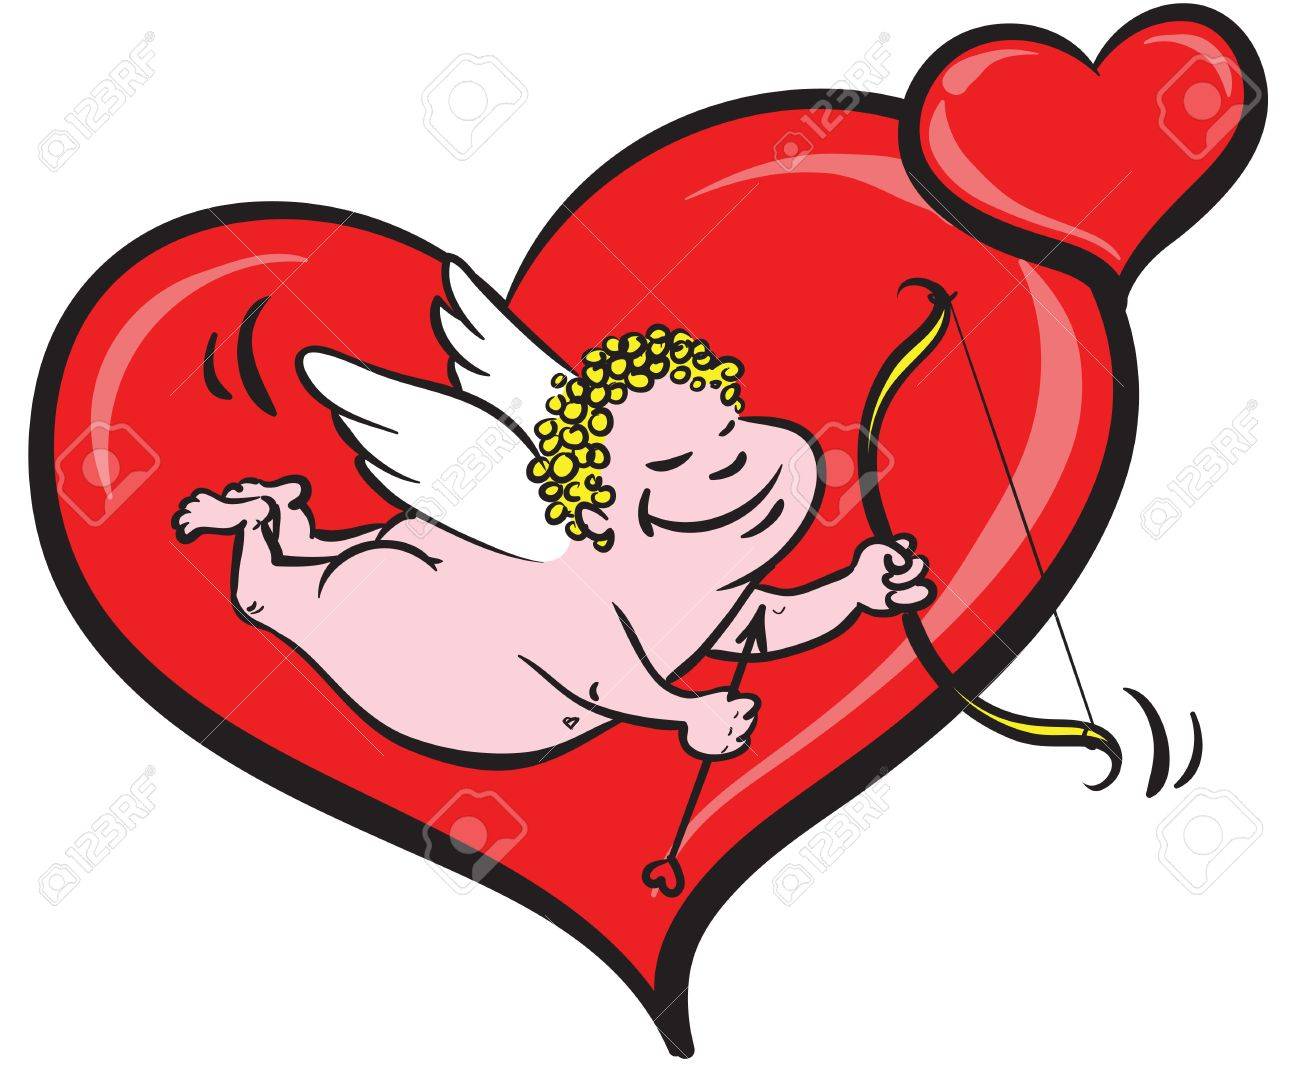 Eros Holding A Bow And Arrow Flying In Front Of Heart